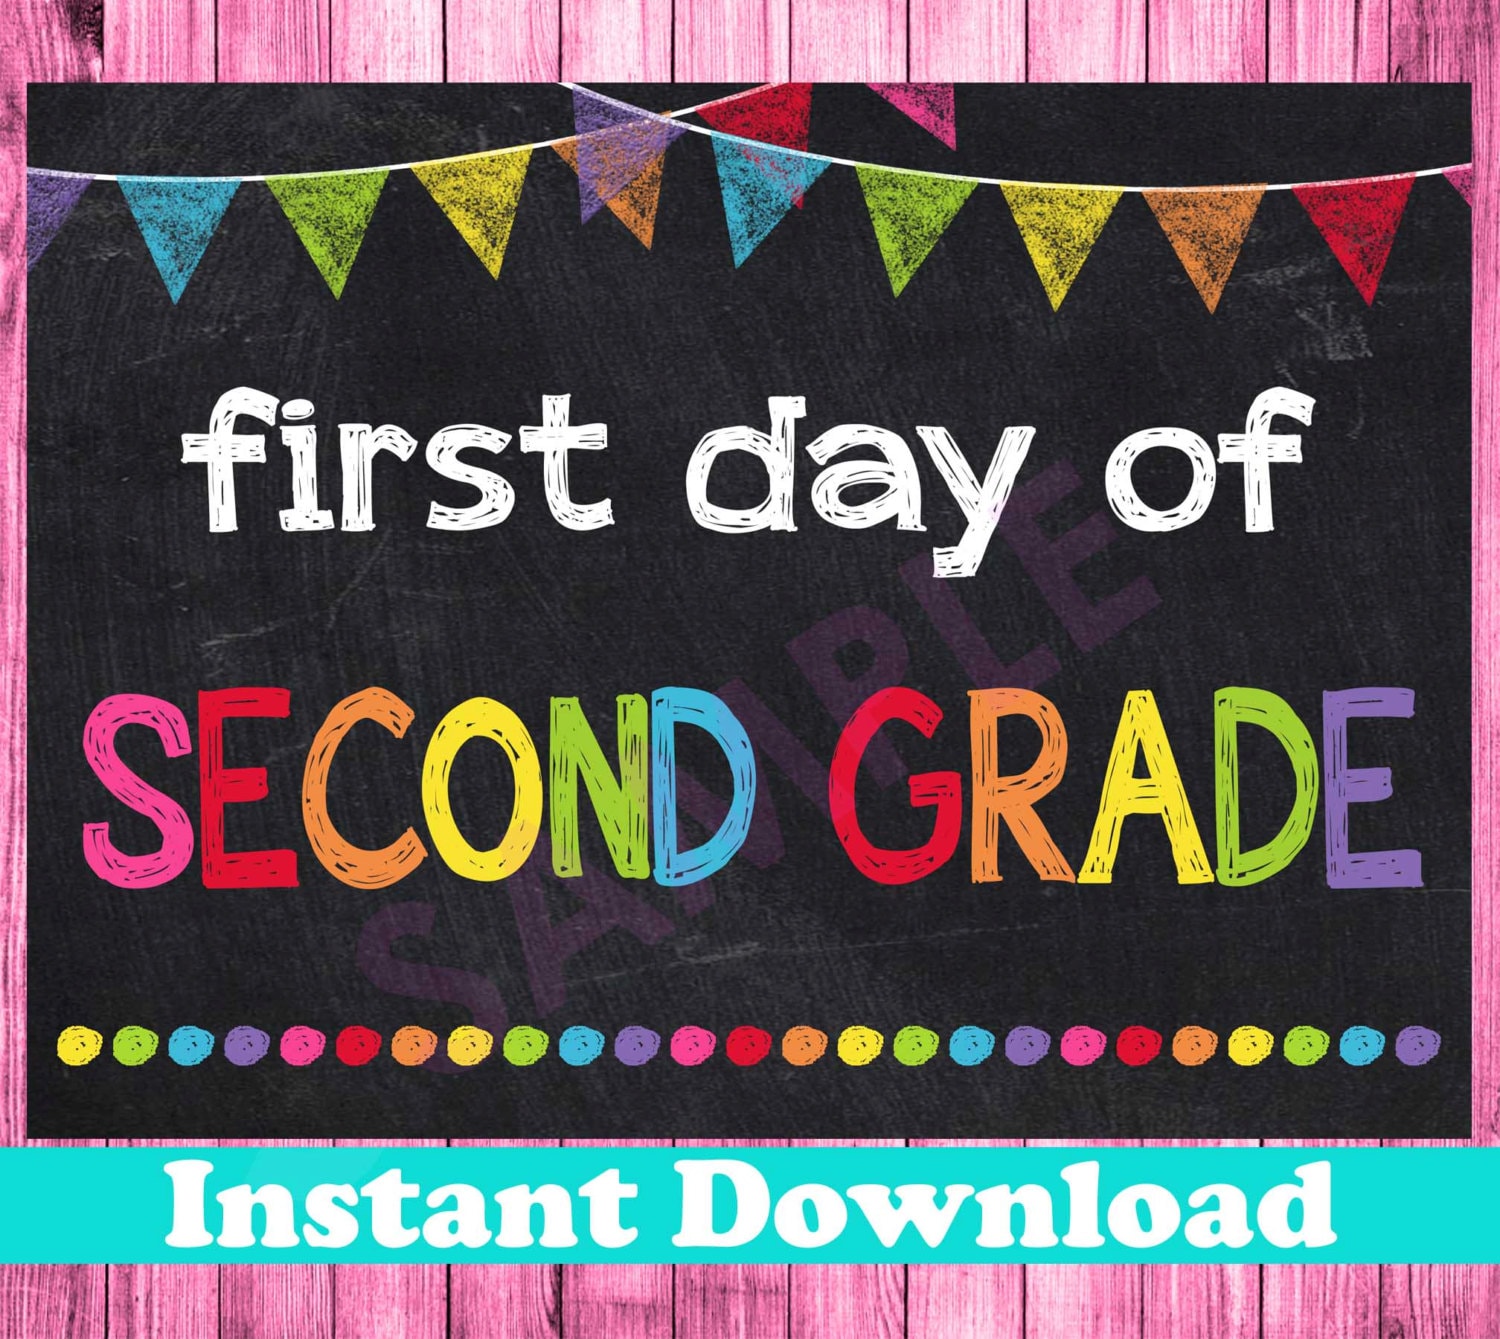 first-day-of-second-grade-sign-instant-download-first-day-of